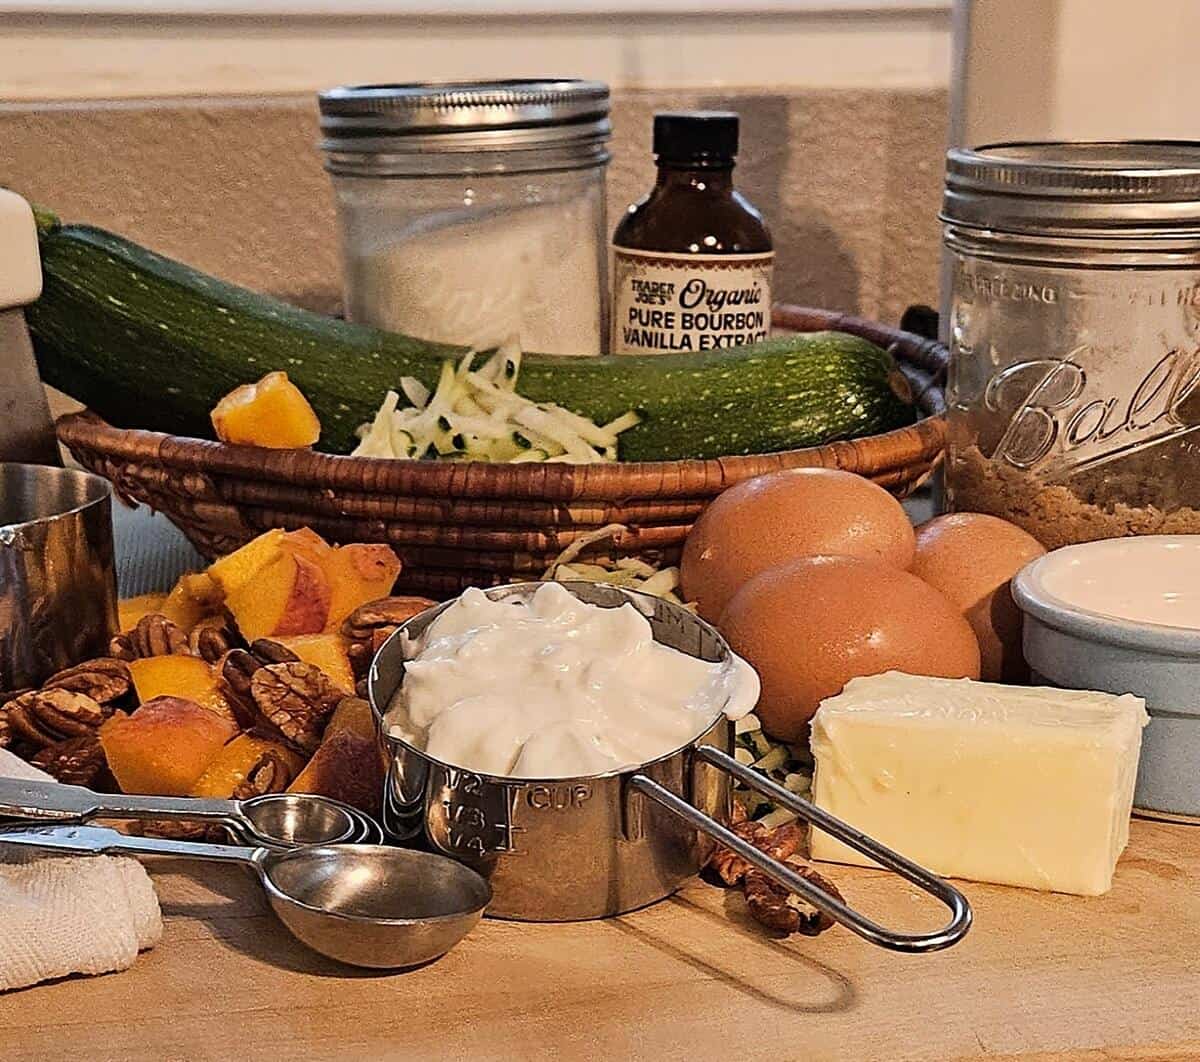 zucchini bread ingredients; zucchini, (shredded and whole), sugar, vanilla extract, brown sugar, eggs, butter, pecans, yogurt, and peaches.